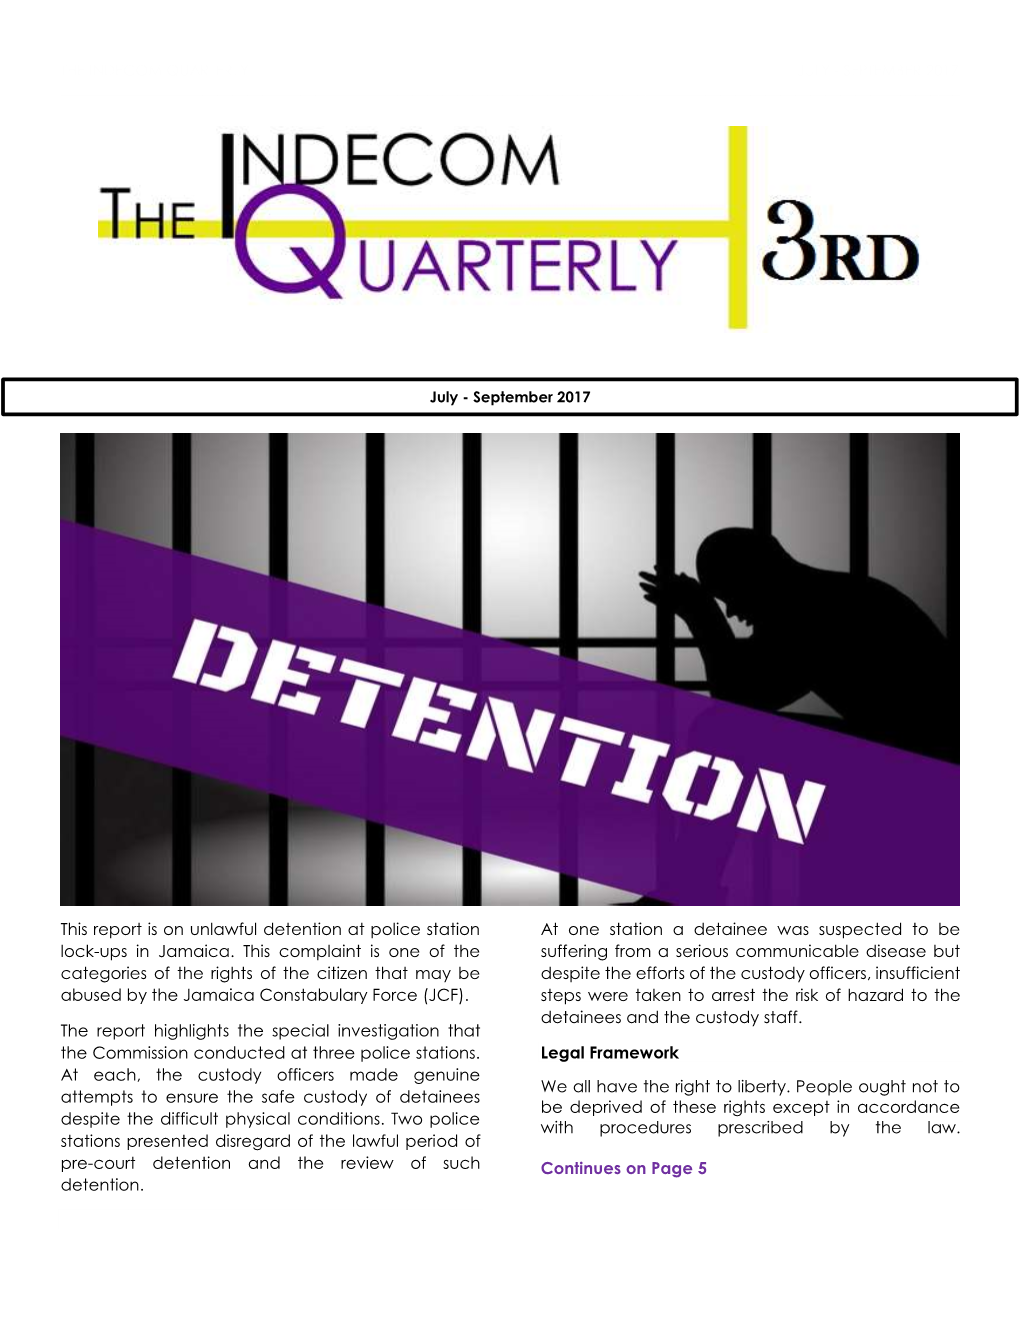 This Report Is on Unlawful Detention at Police Station Lock-Ups in Jamaica